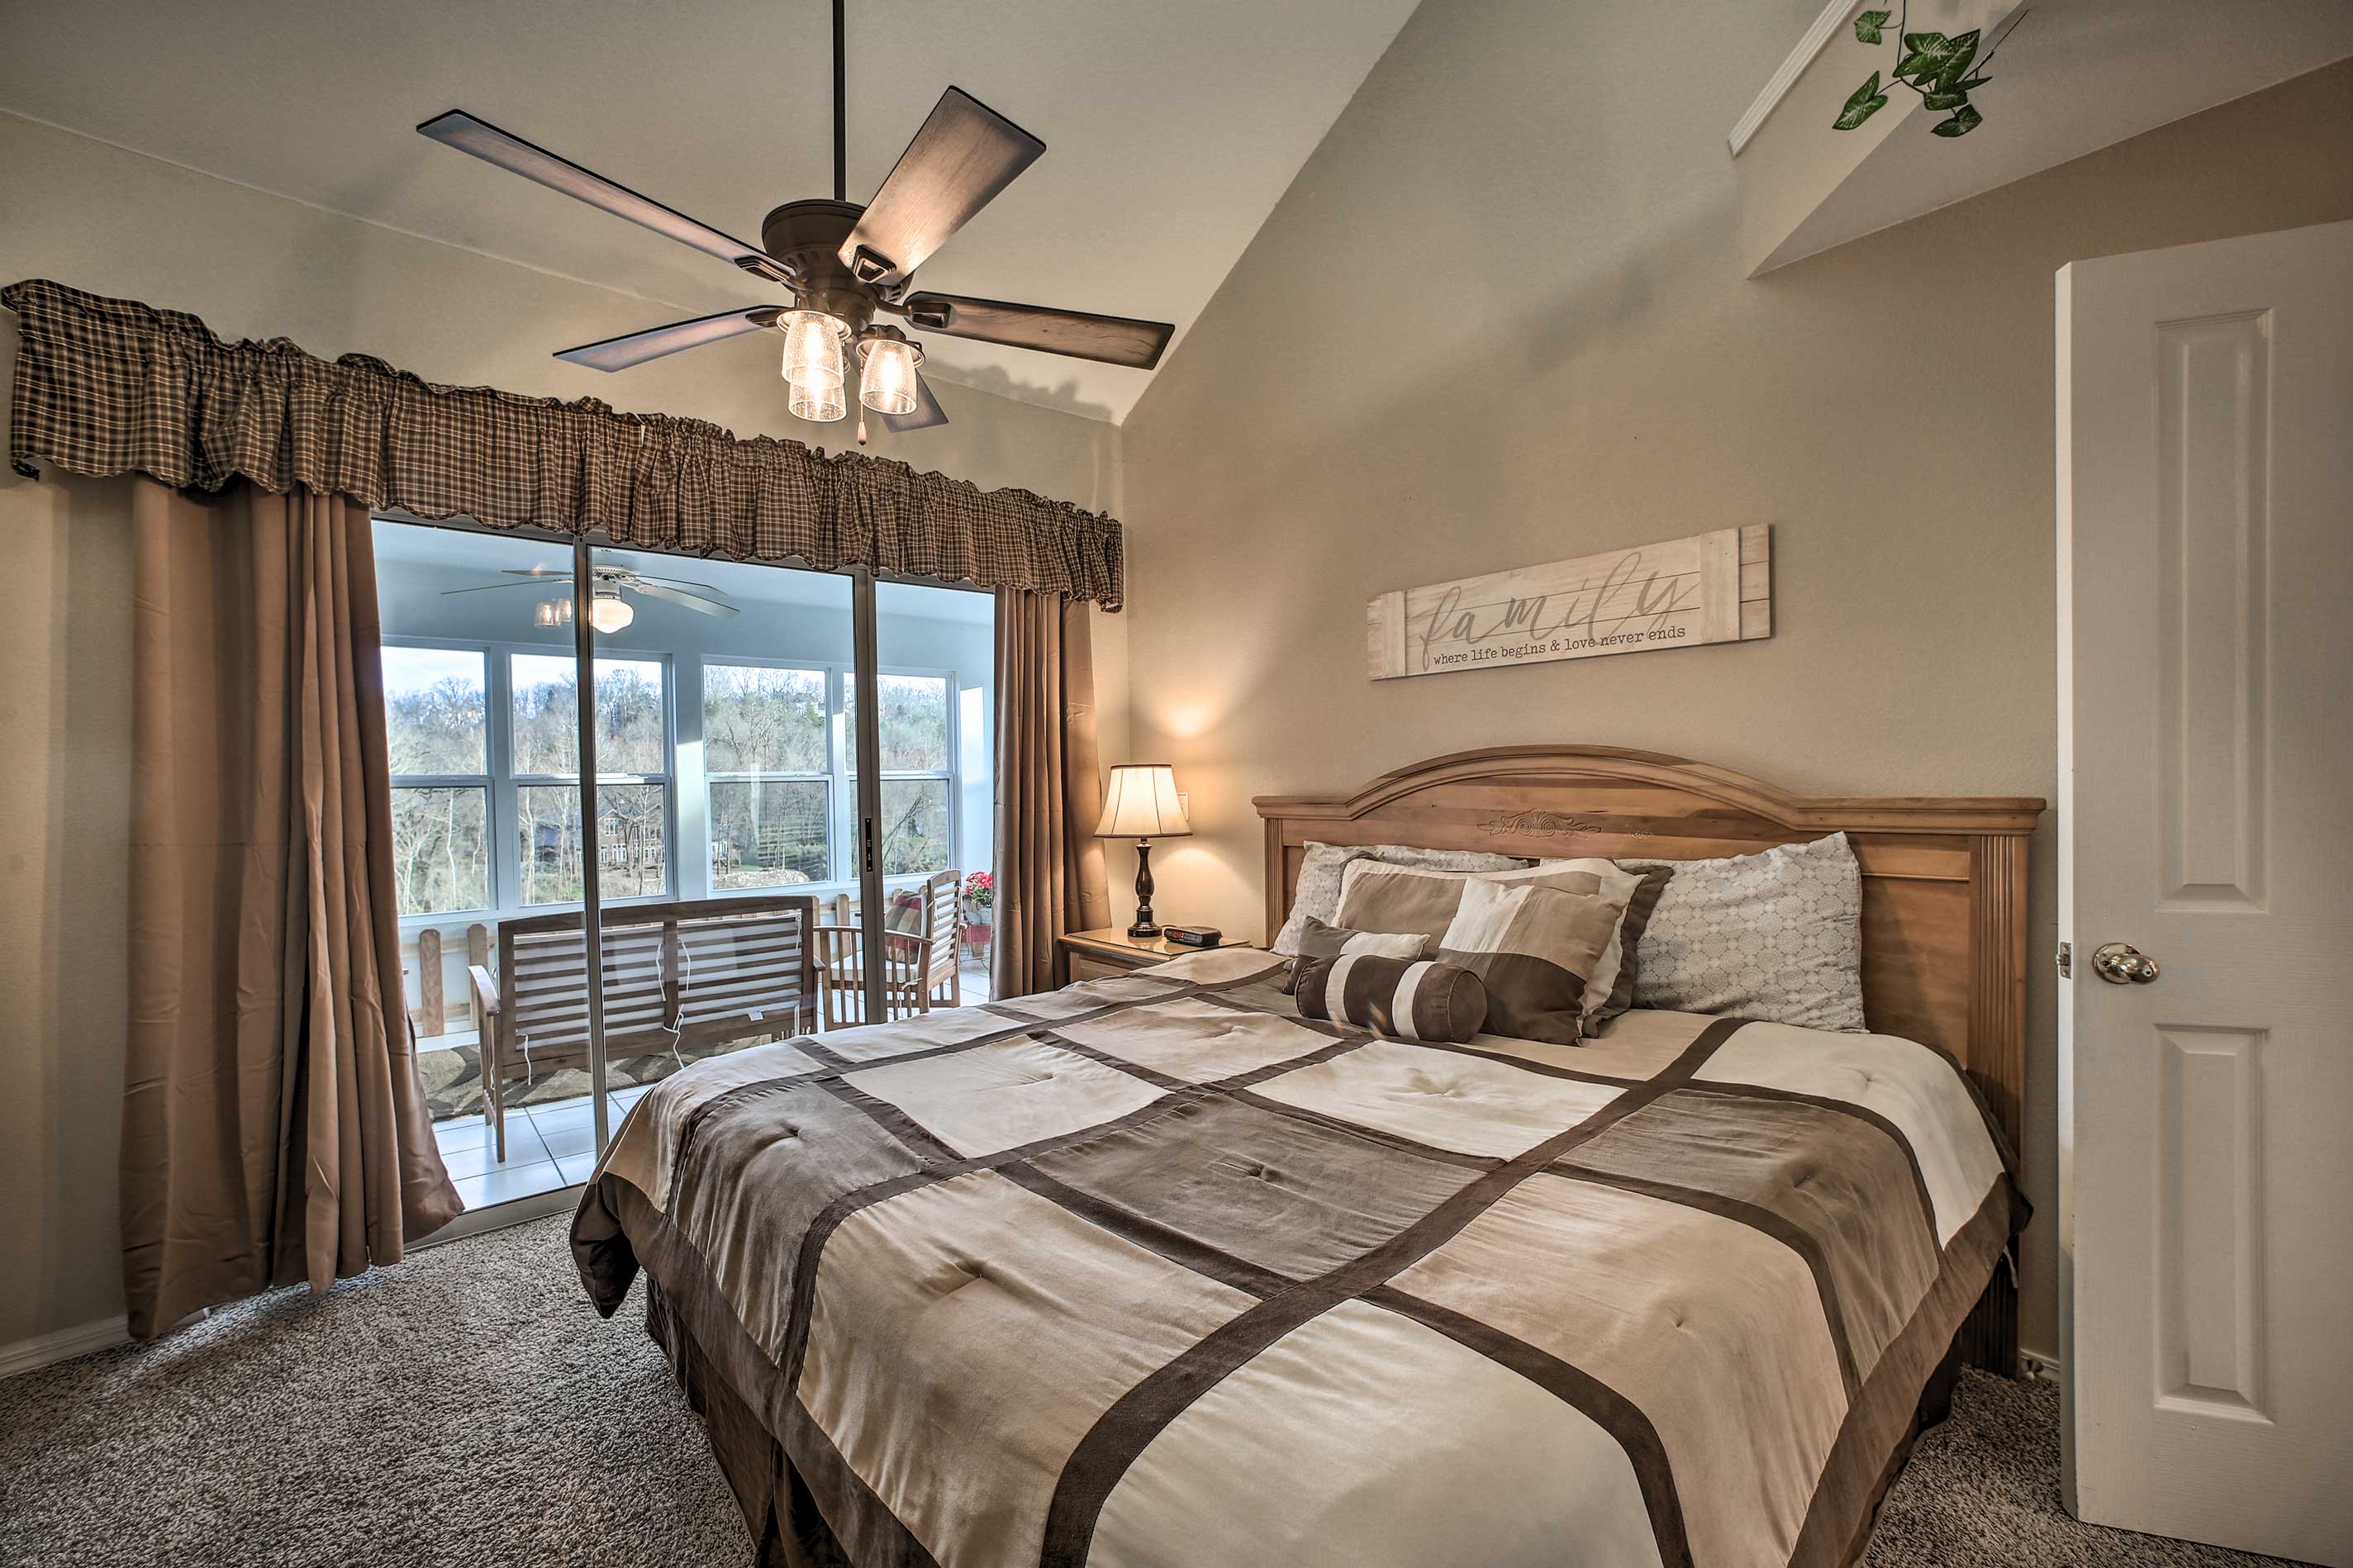 This bedroom features private access to the sunroom.